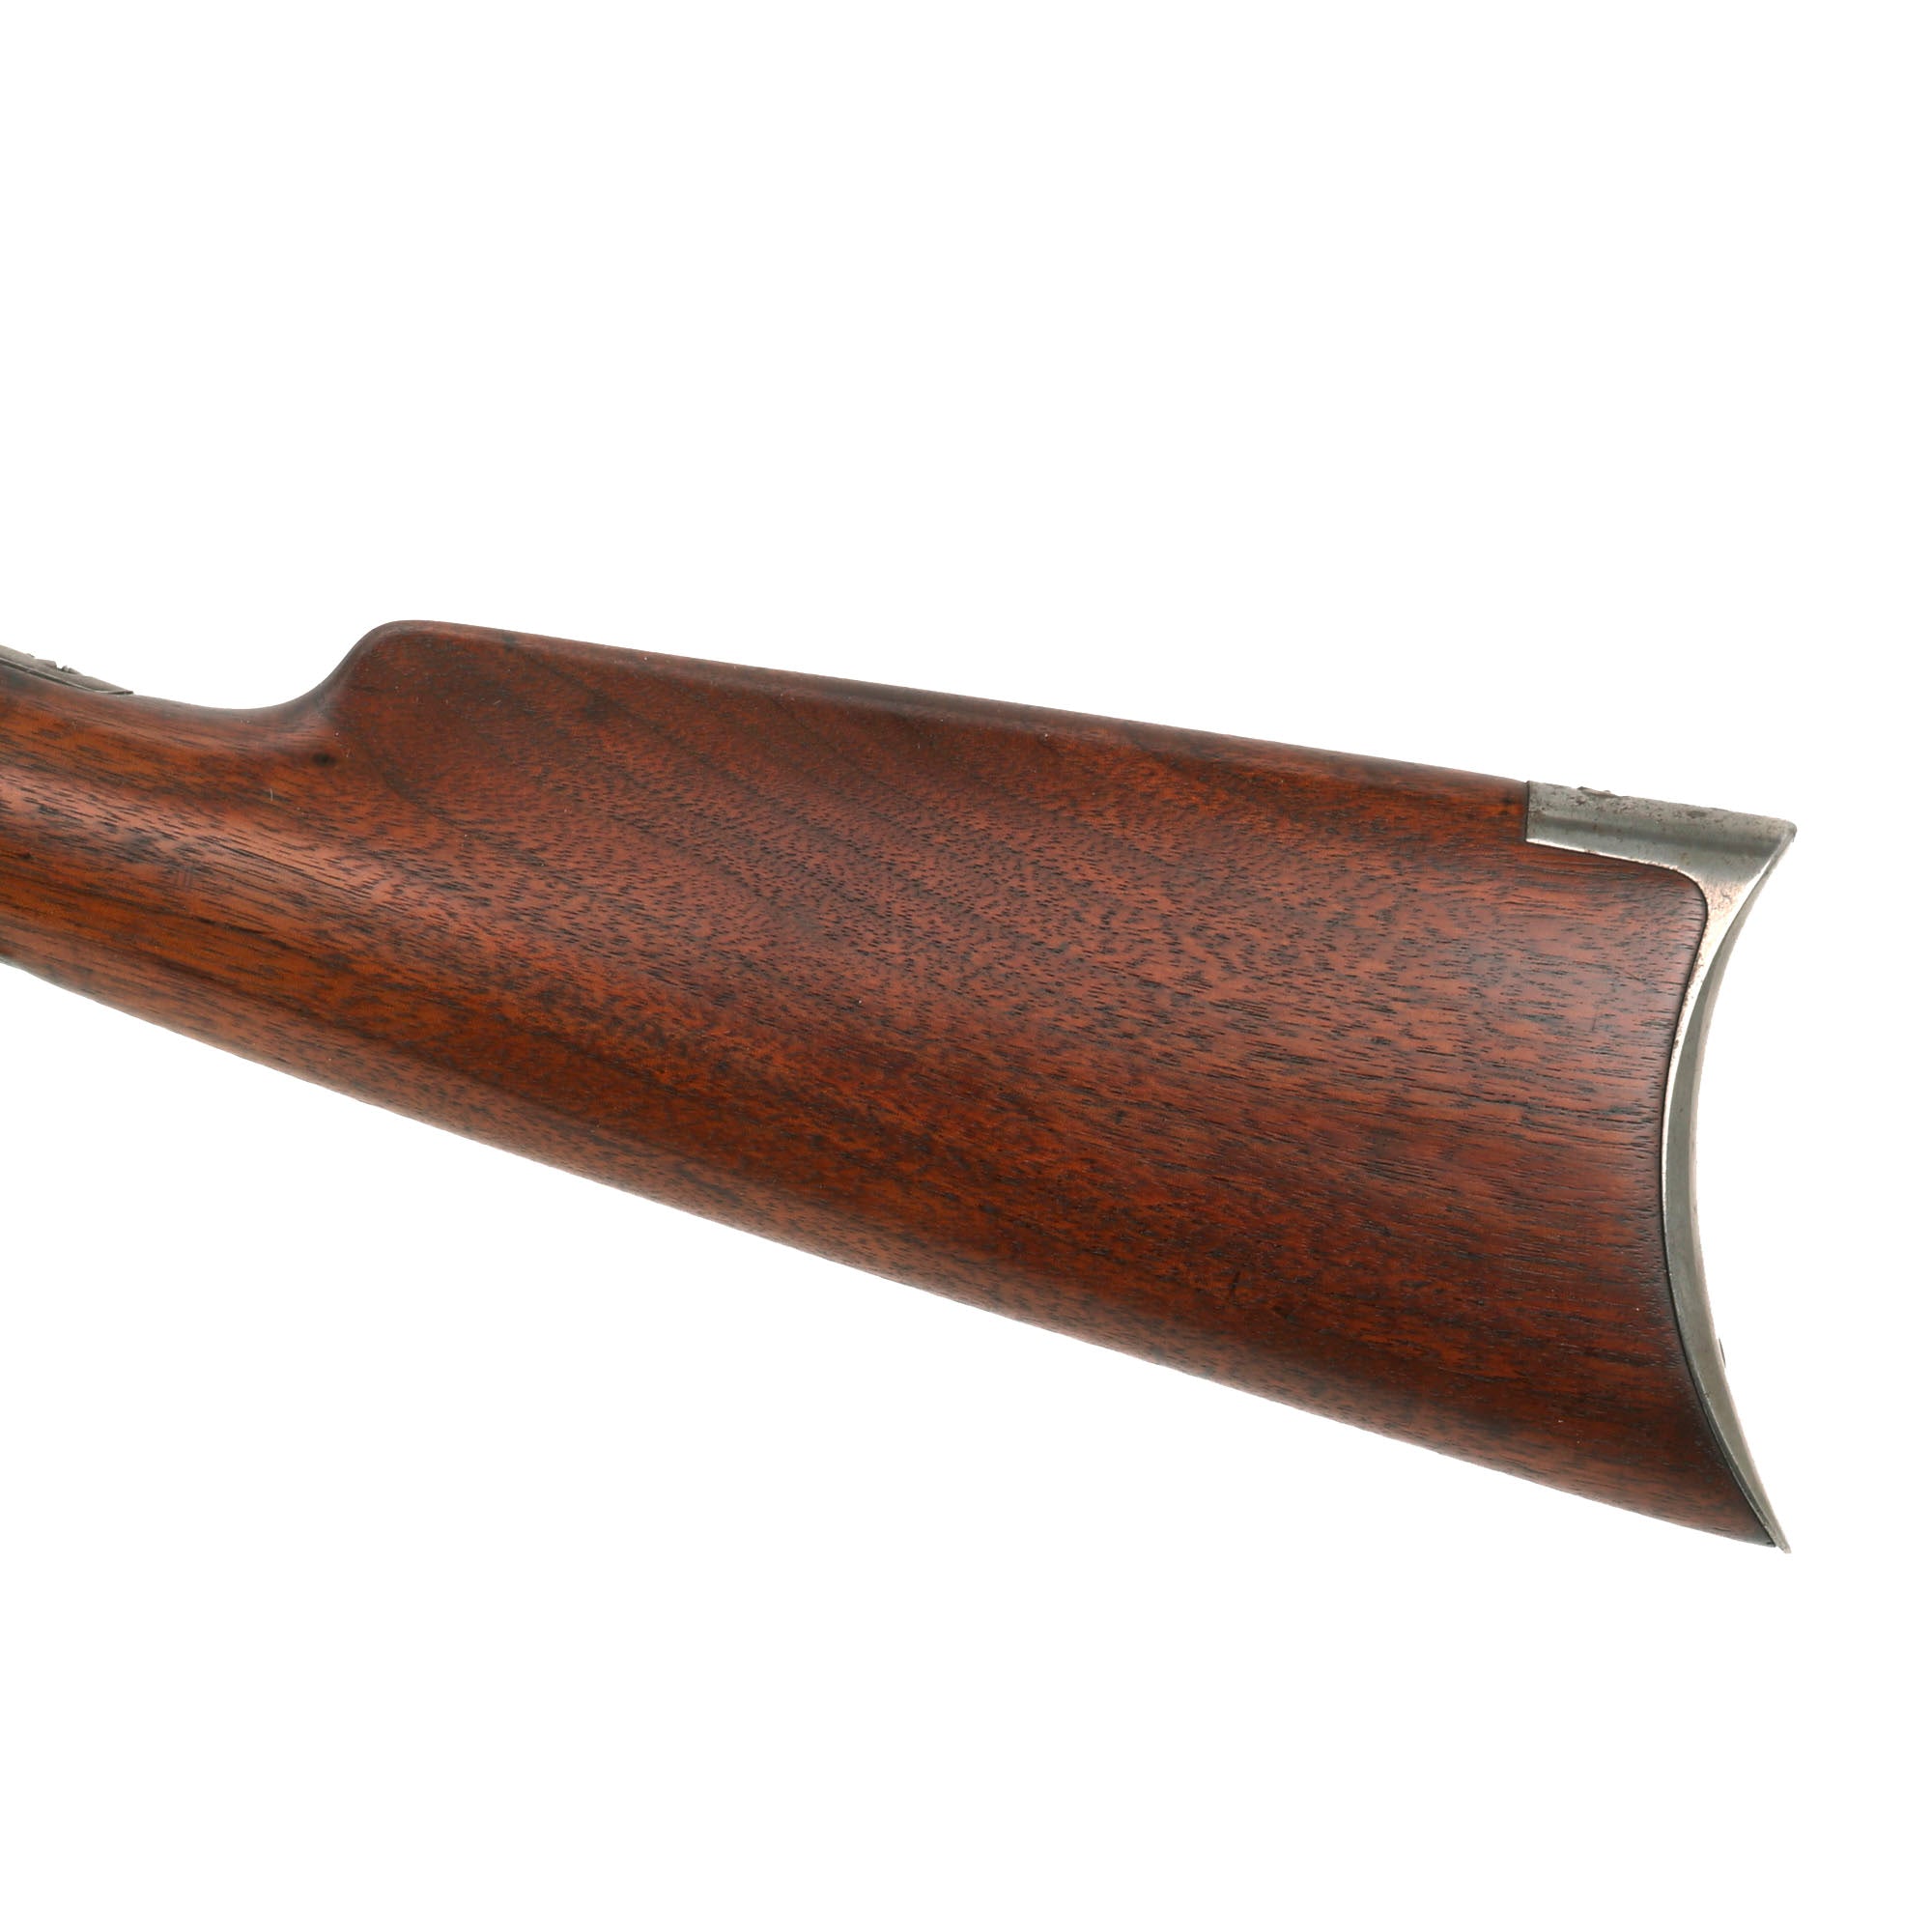 Winchester 1894 .32-40, 1902, checkered, Swiss-type butt plate, 26-inch  octagon, factory letter, solid mechanics, 60 percent receiver finish,  layaway